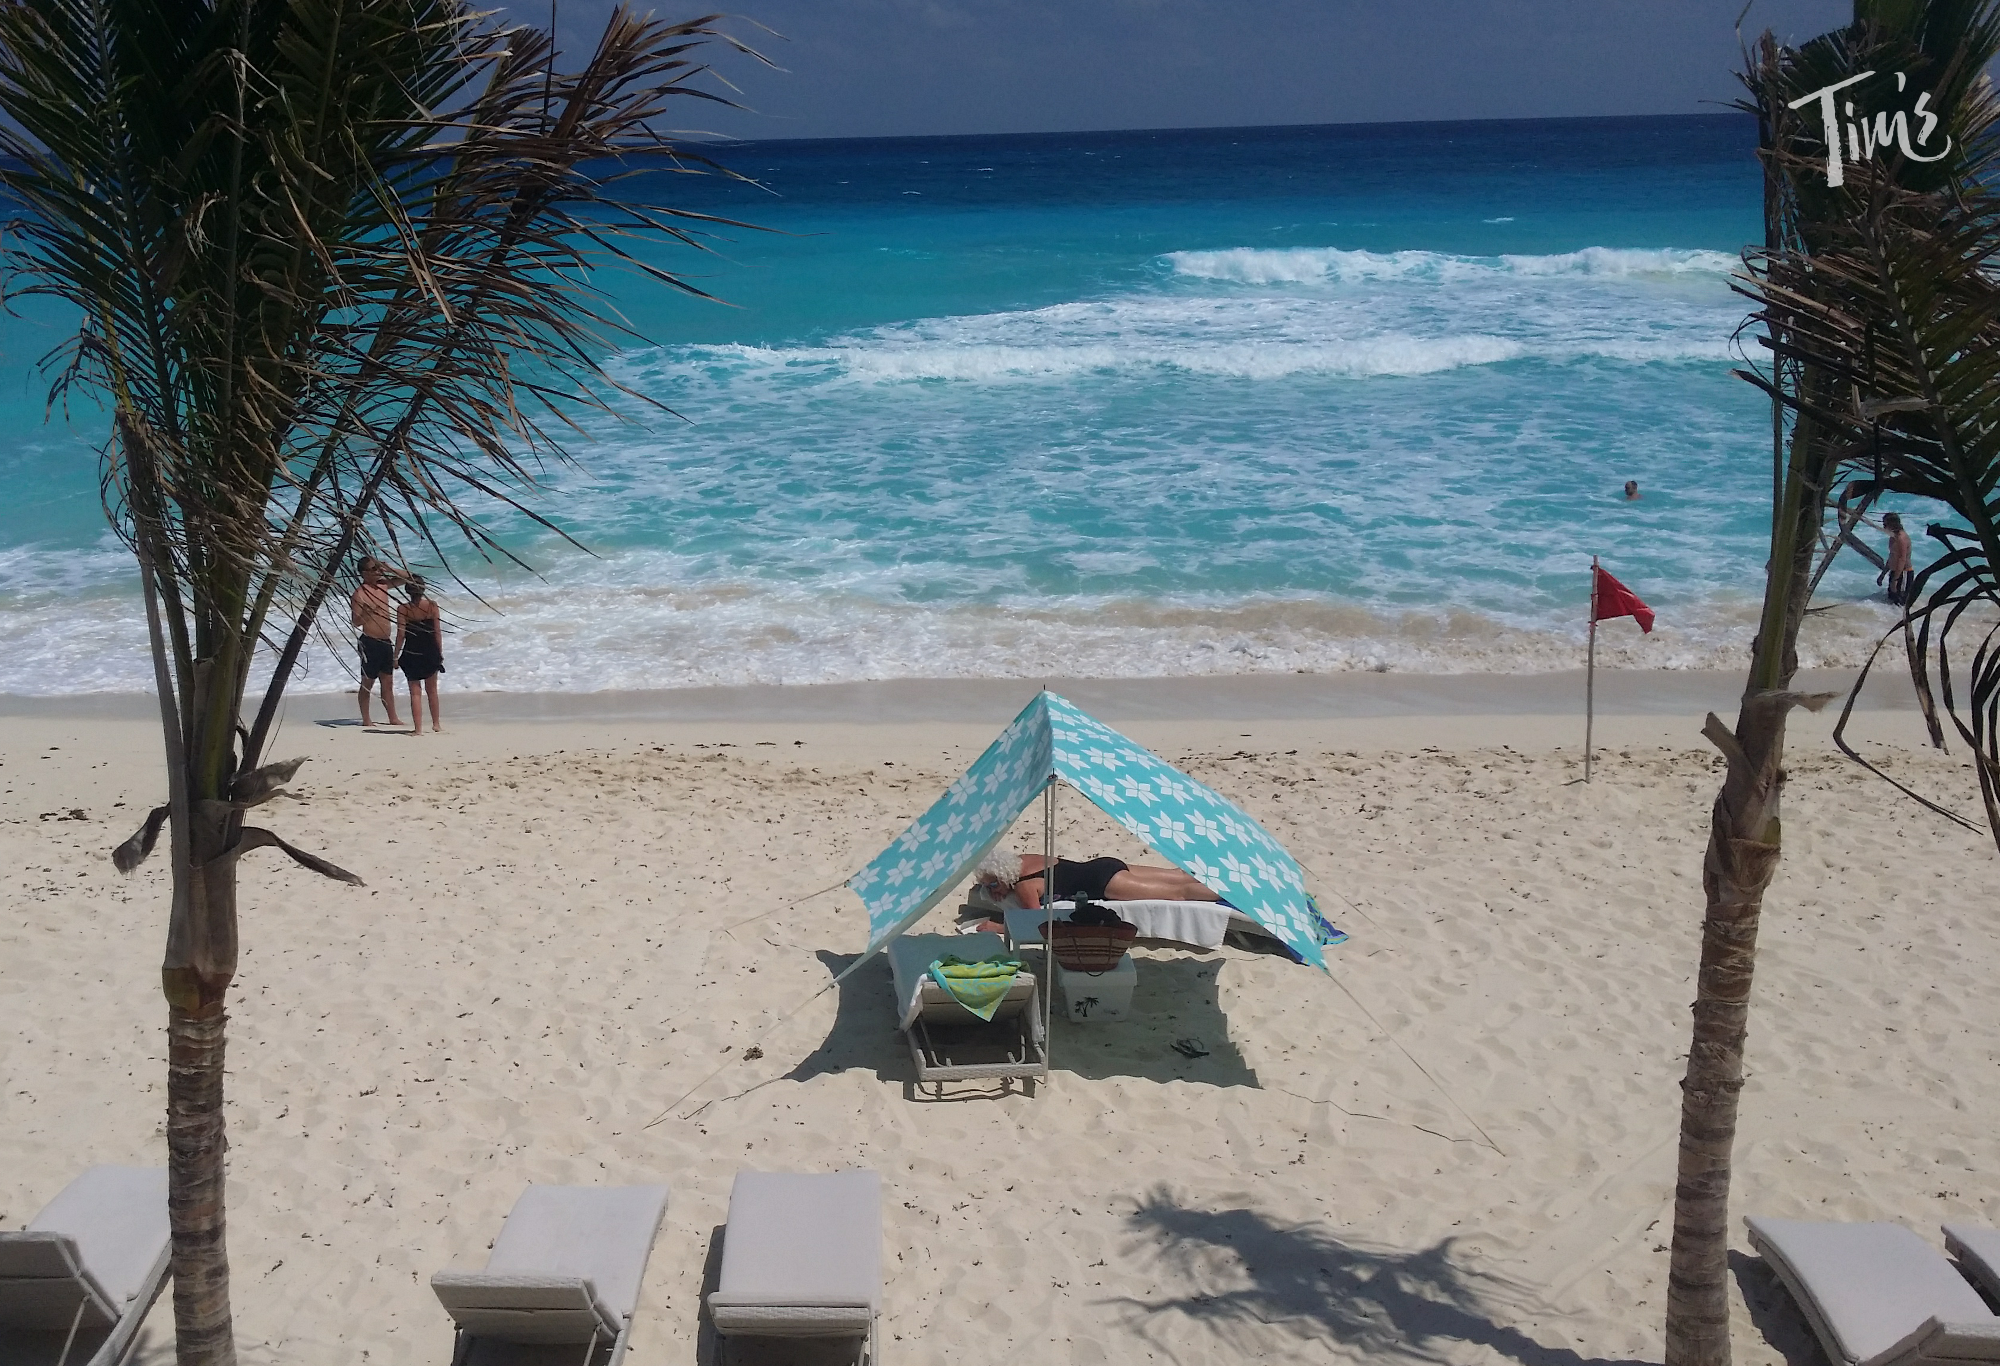 cancun beach with people walking oceanside